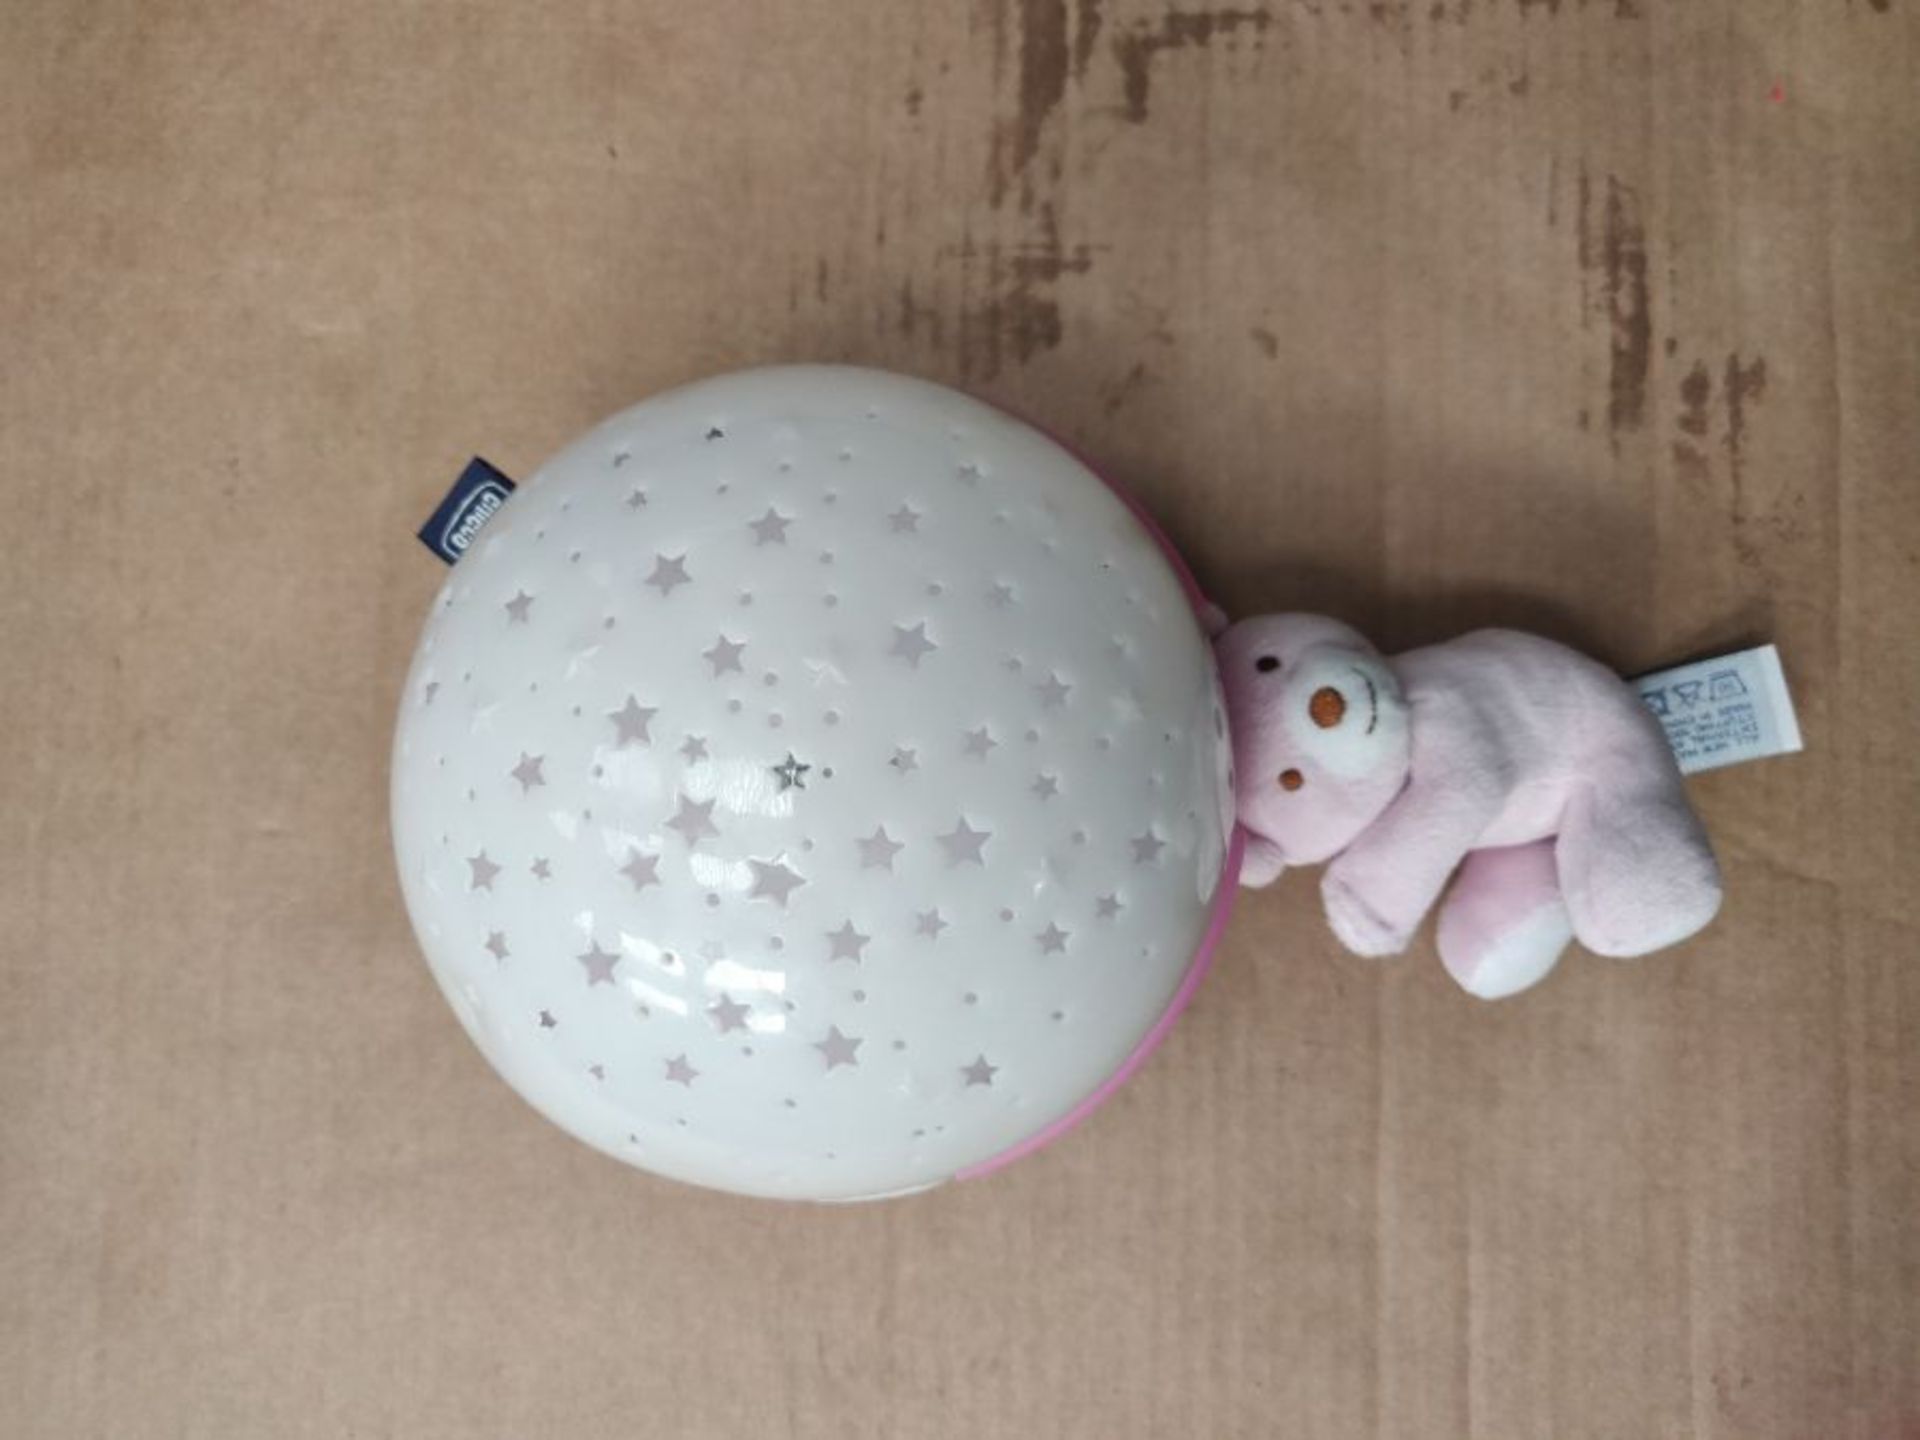 Chicco Next2Stars Baby Night Light with Plush Toy - Star Light Projector for Cots and - Image 3 of 3